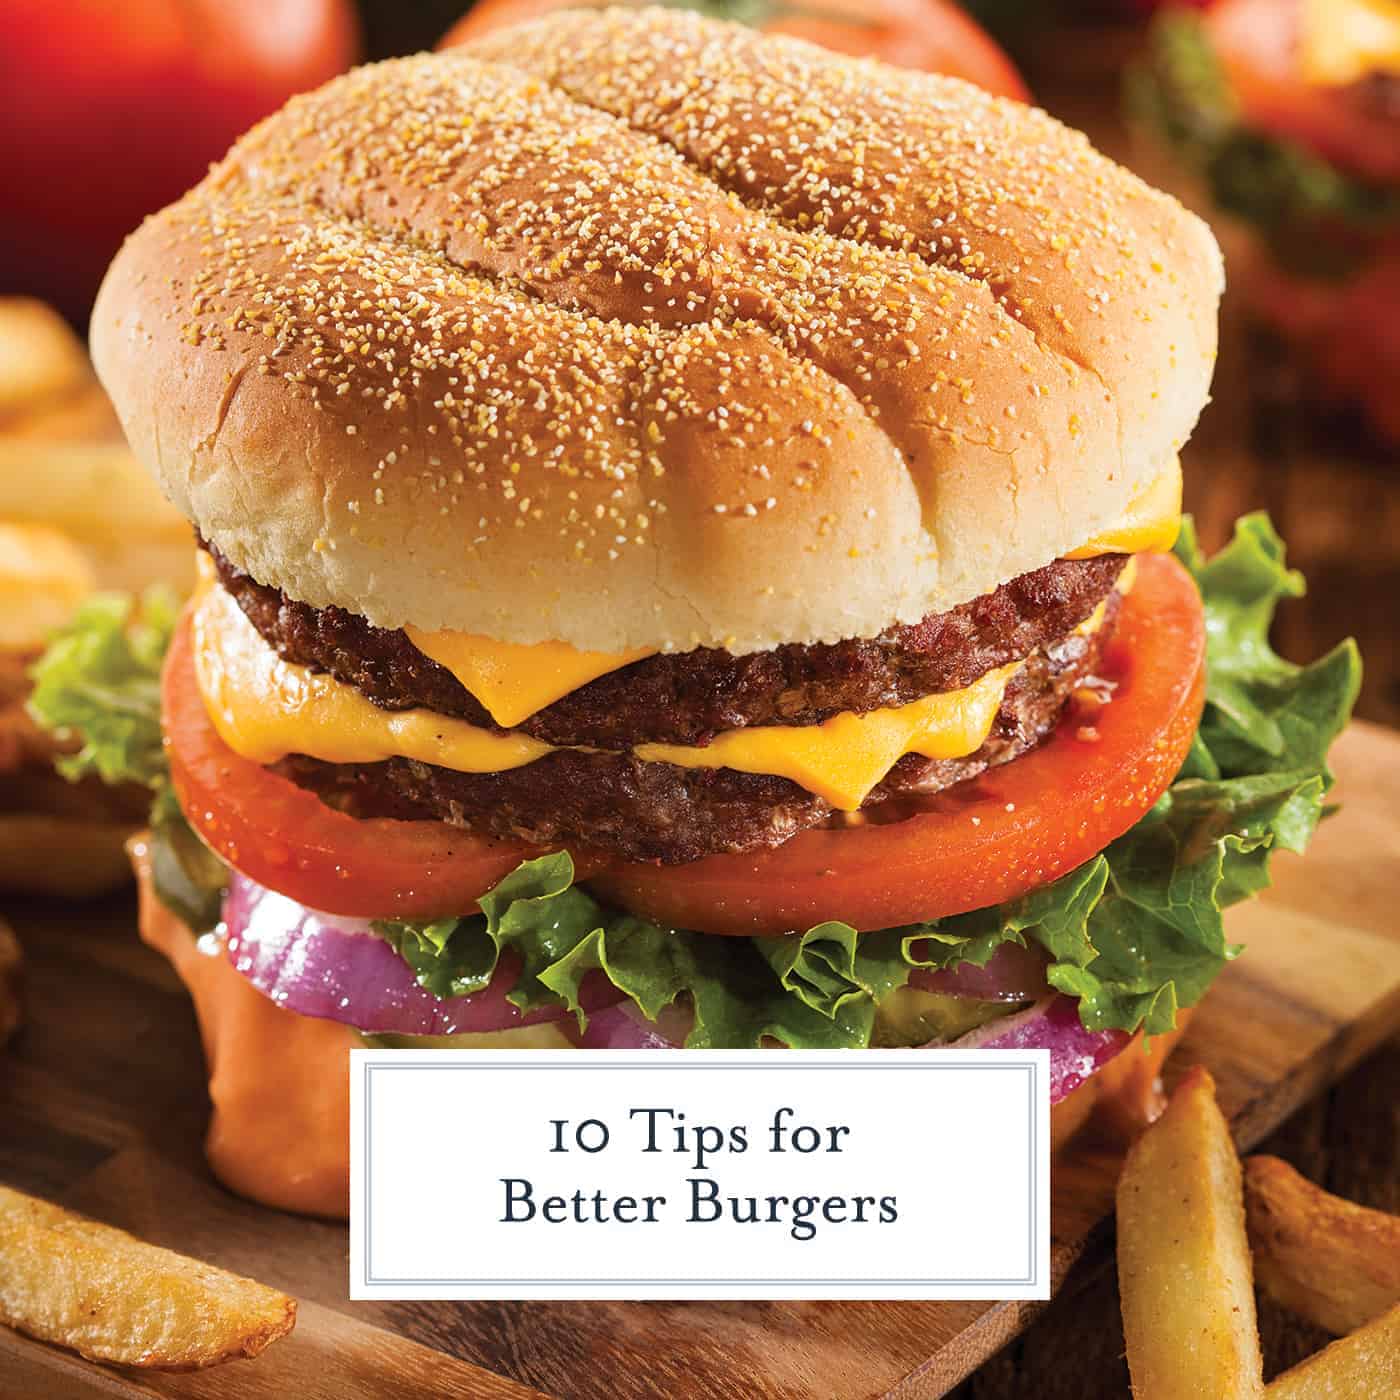 Read these 10 tips for better burgers to make every single hamburger recipe better by miles: juicy, flavorful and delicious! You won't beleive #4! #hamburgerrecipes #burgerrecipes www.savoryexperiments.com 